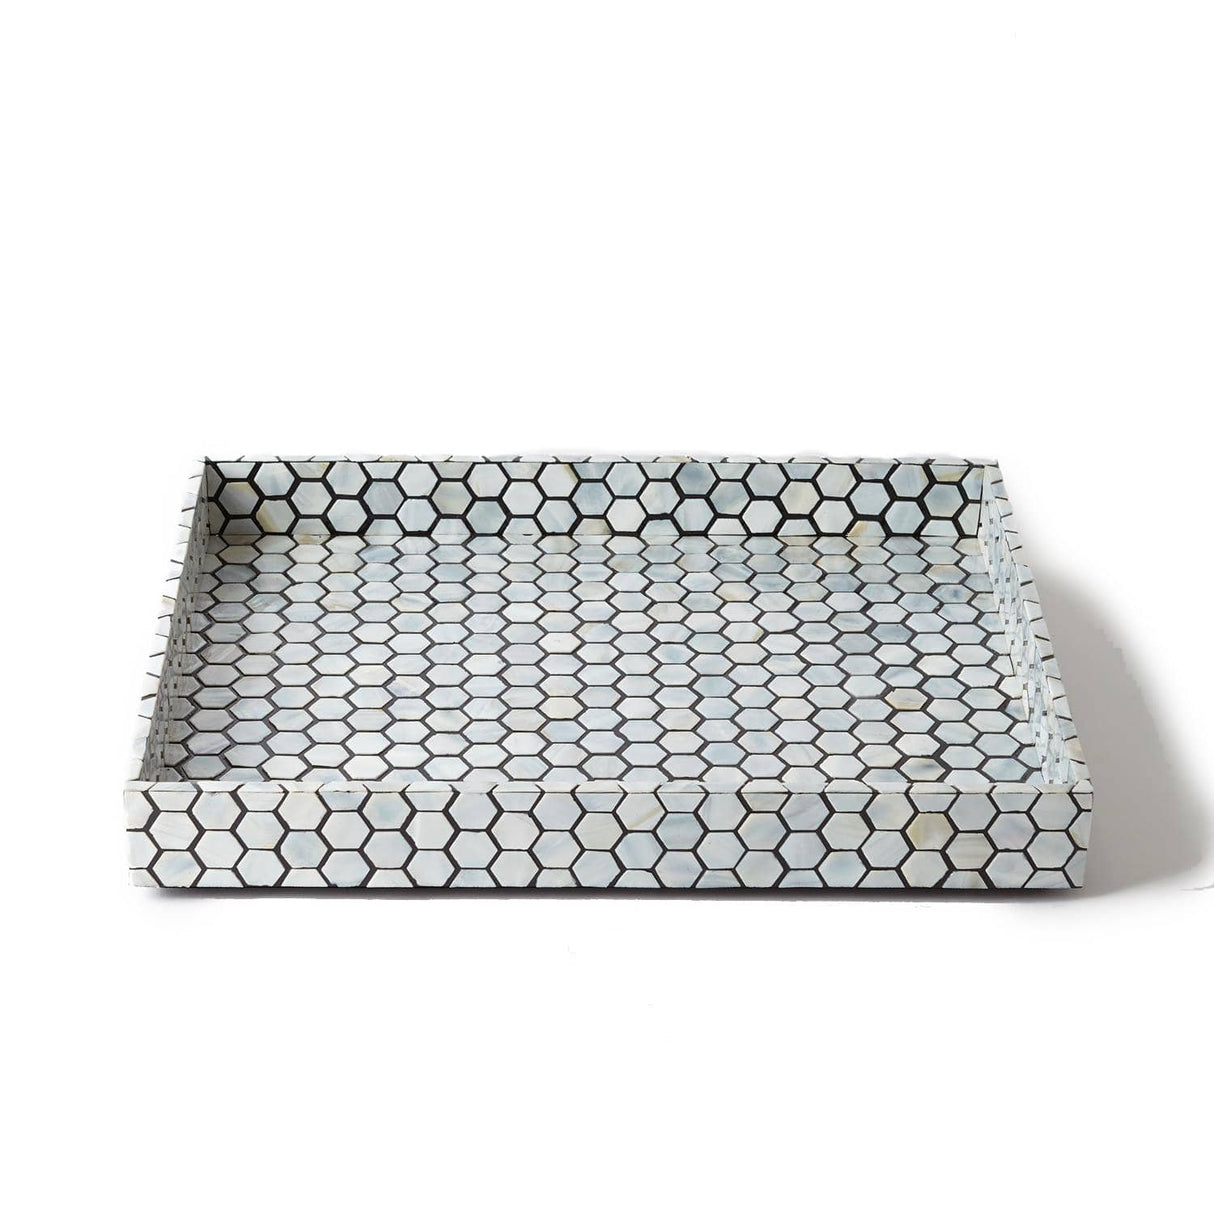 Global Views Mother of Pearl Tray - Black Decor